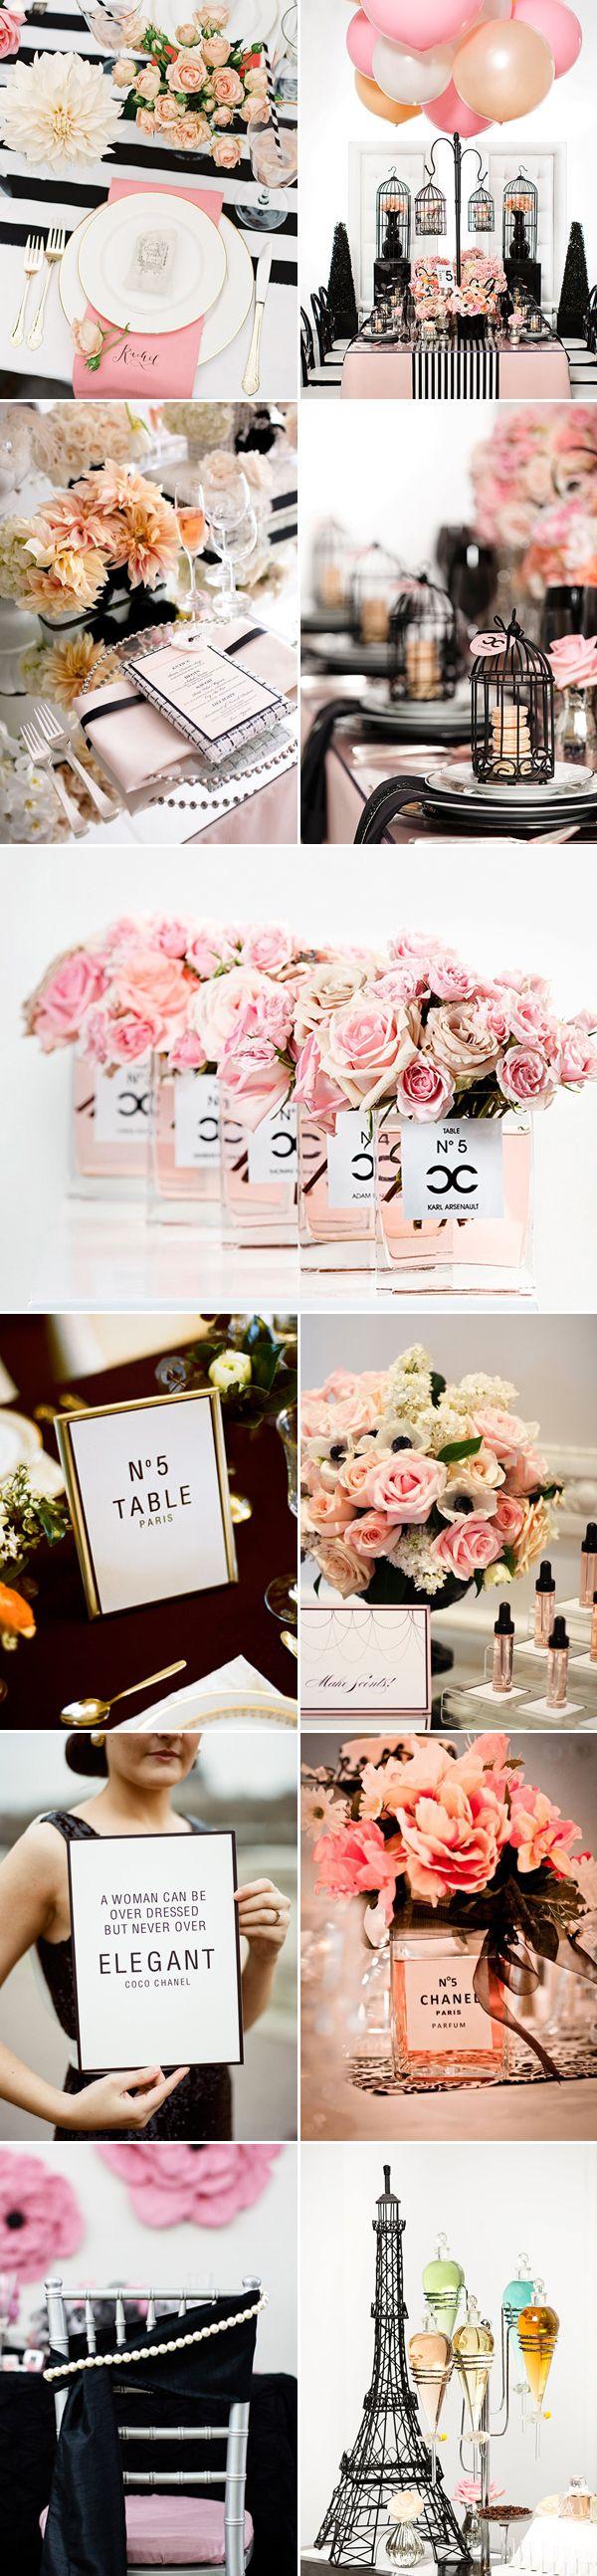 Wedding - Classy And Fabulous! Chanel-Inspired Wedding Designs